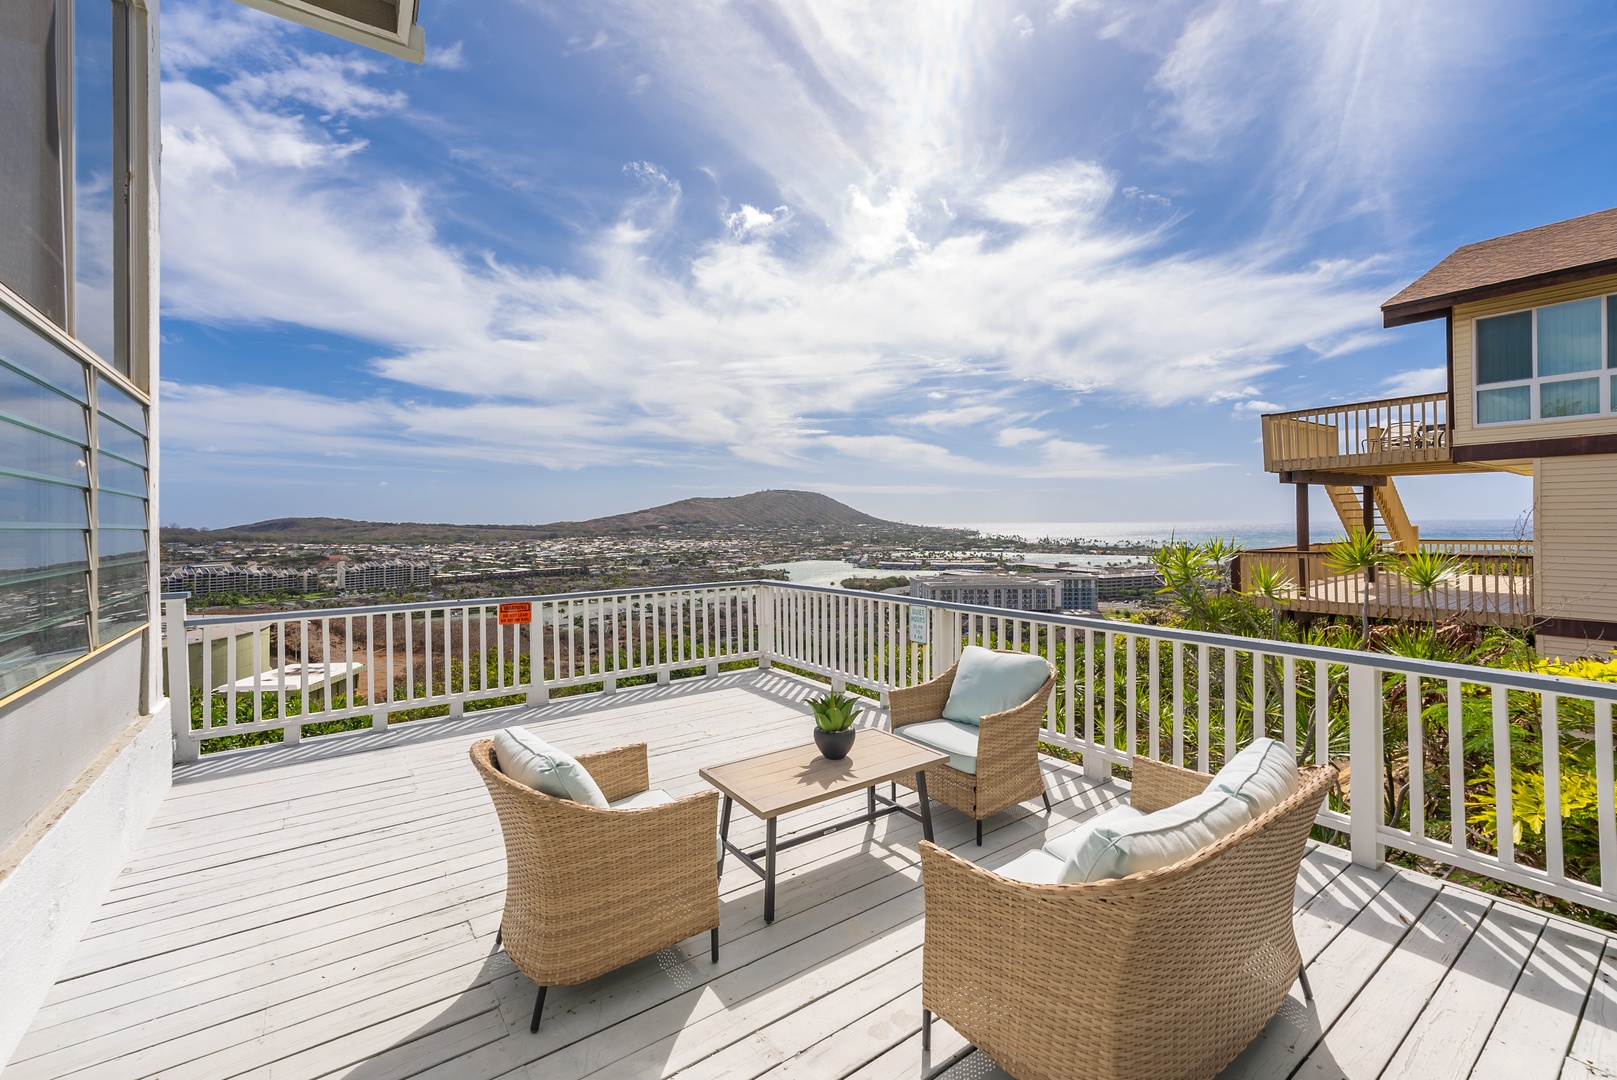 Large lanai with outdoor seating and spectacular views